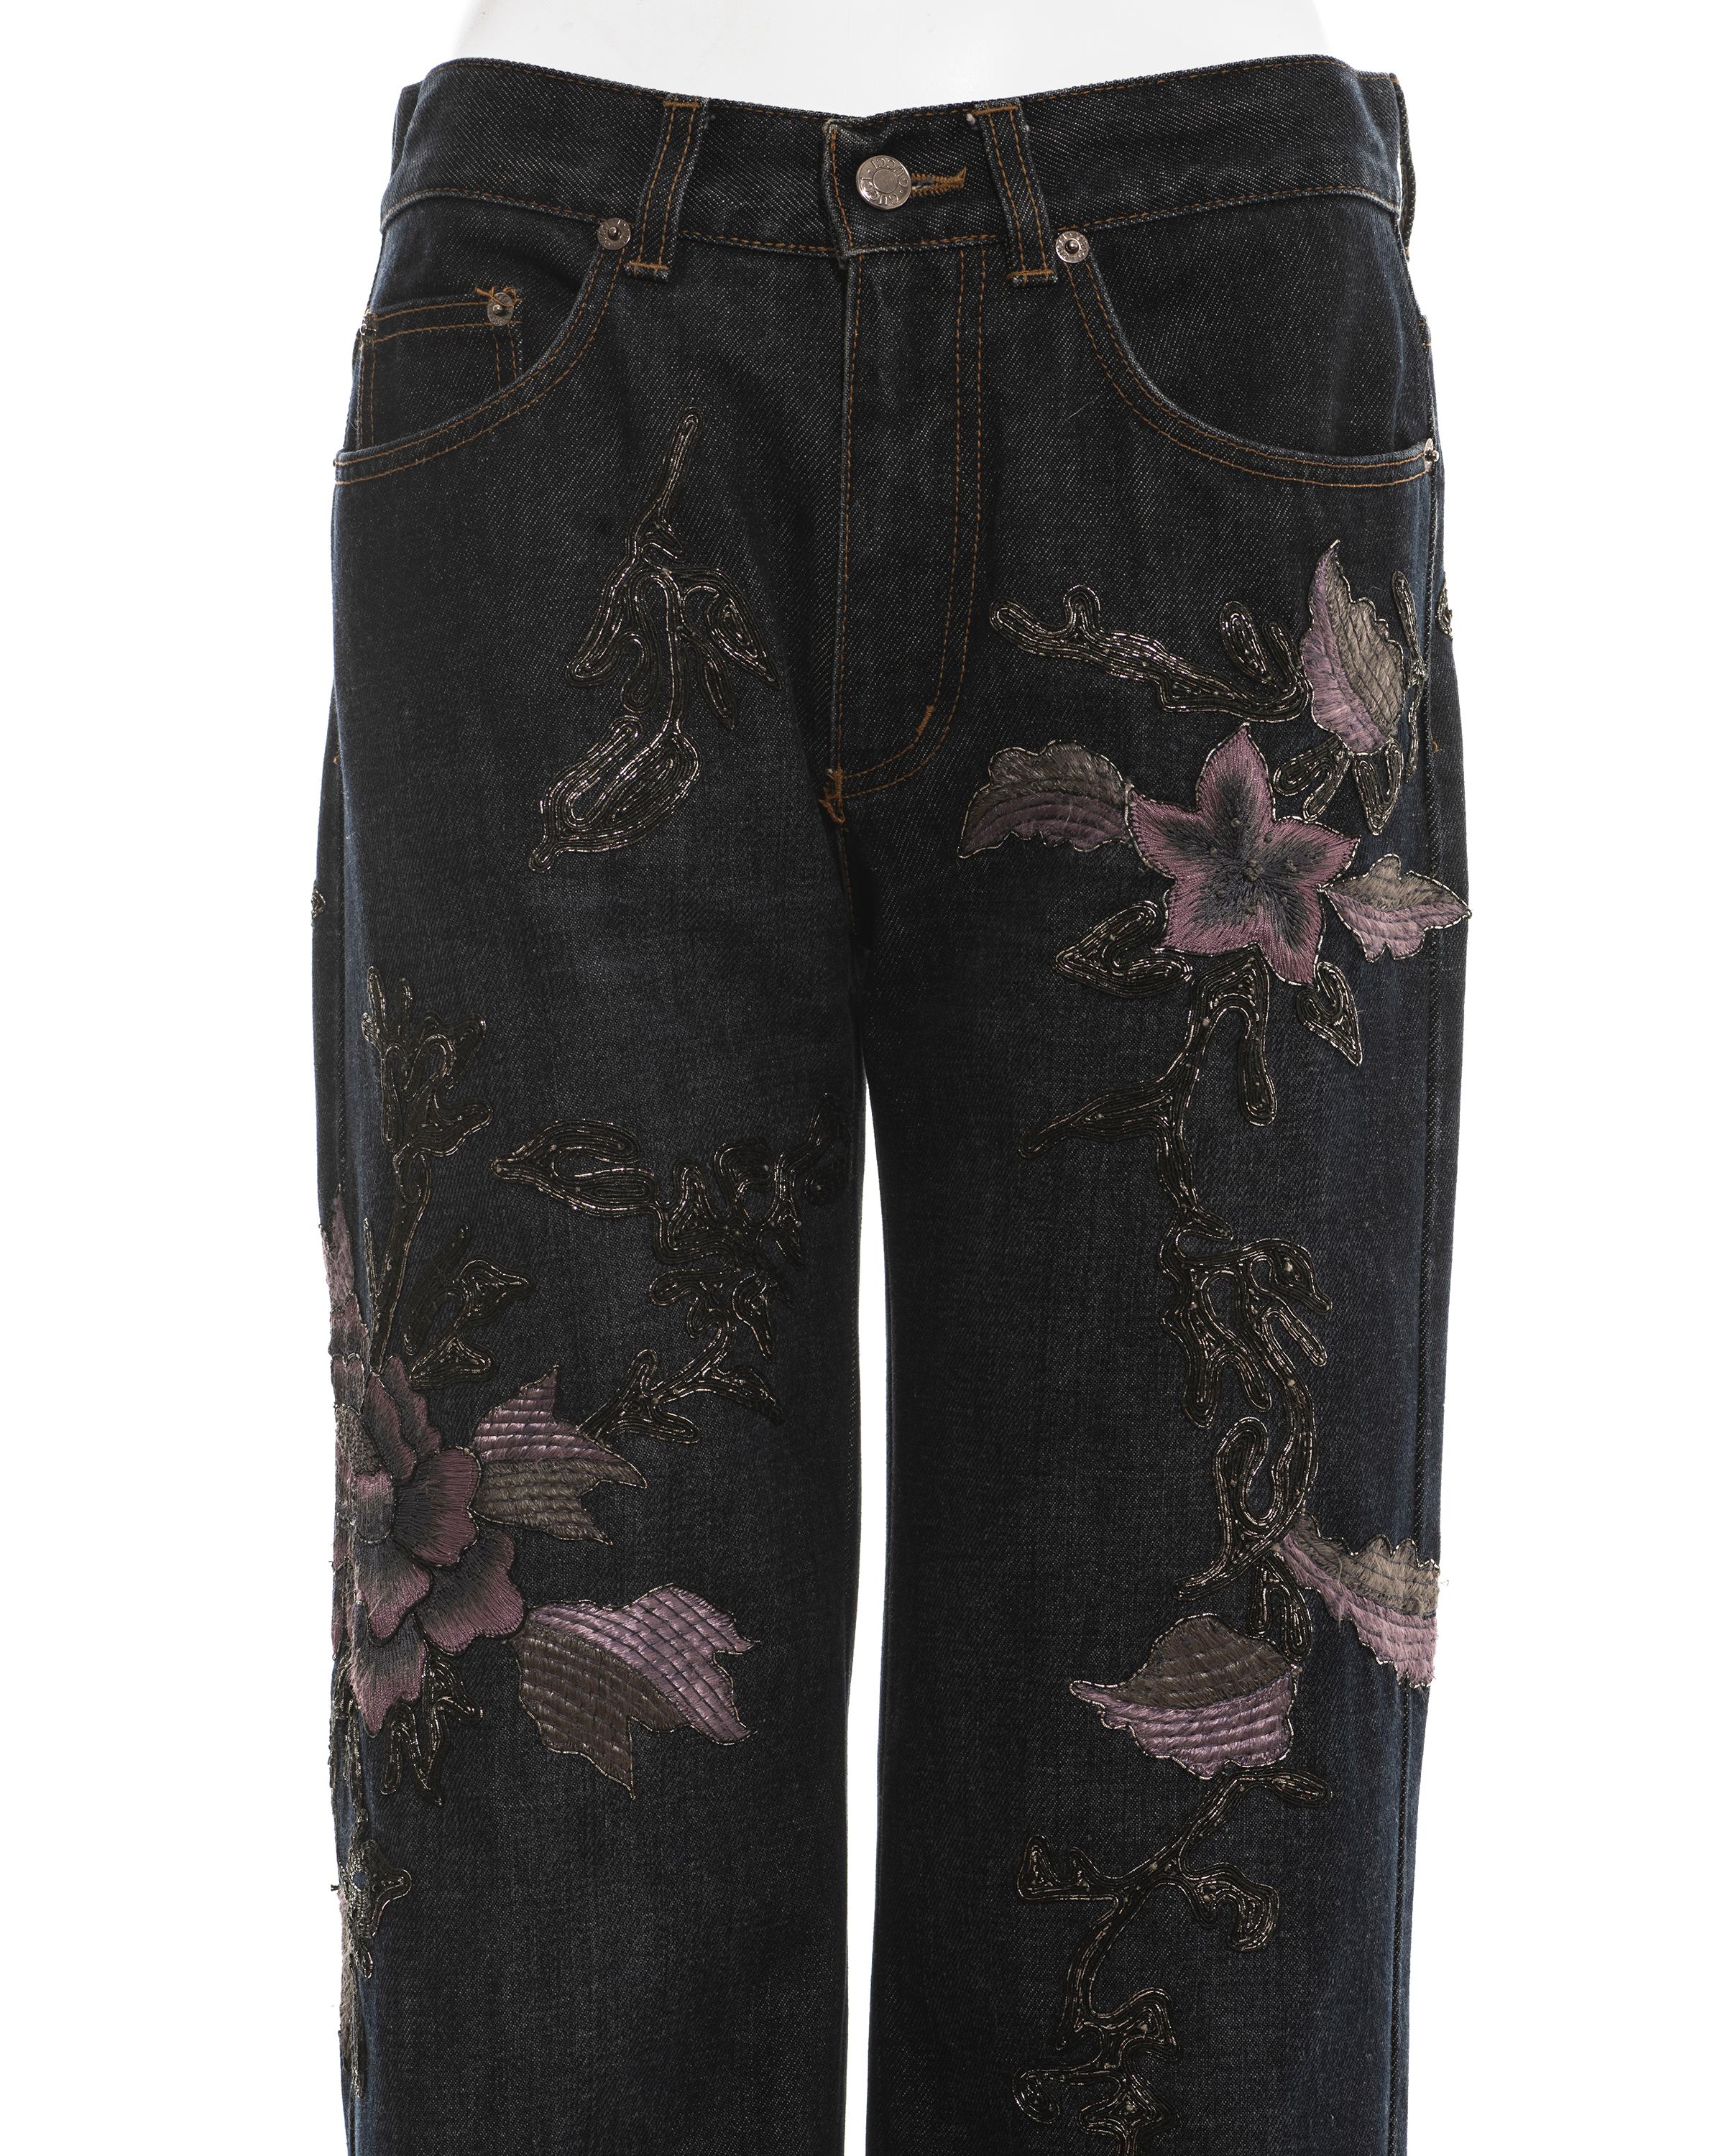 Gucci Floral Jeans - 3 For Sale on 1stDibs | gucci floral jeans mens, gucci  floral painted jeans, floral jeans mens